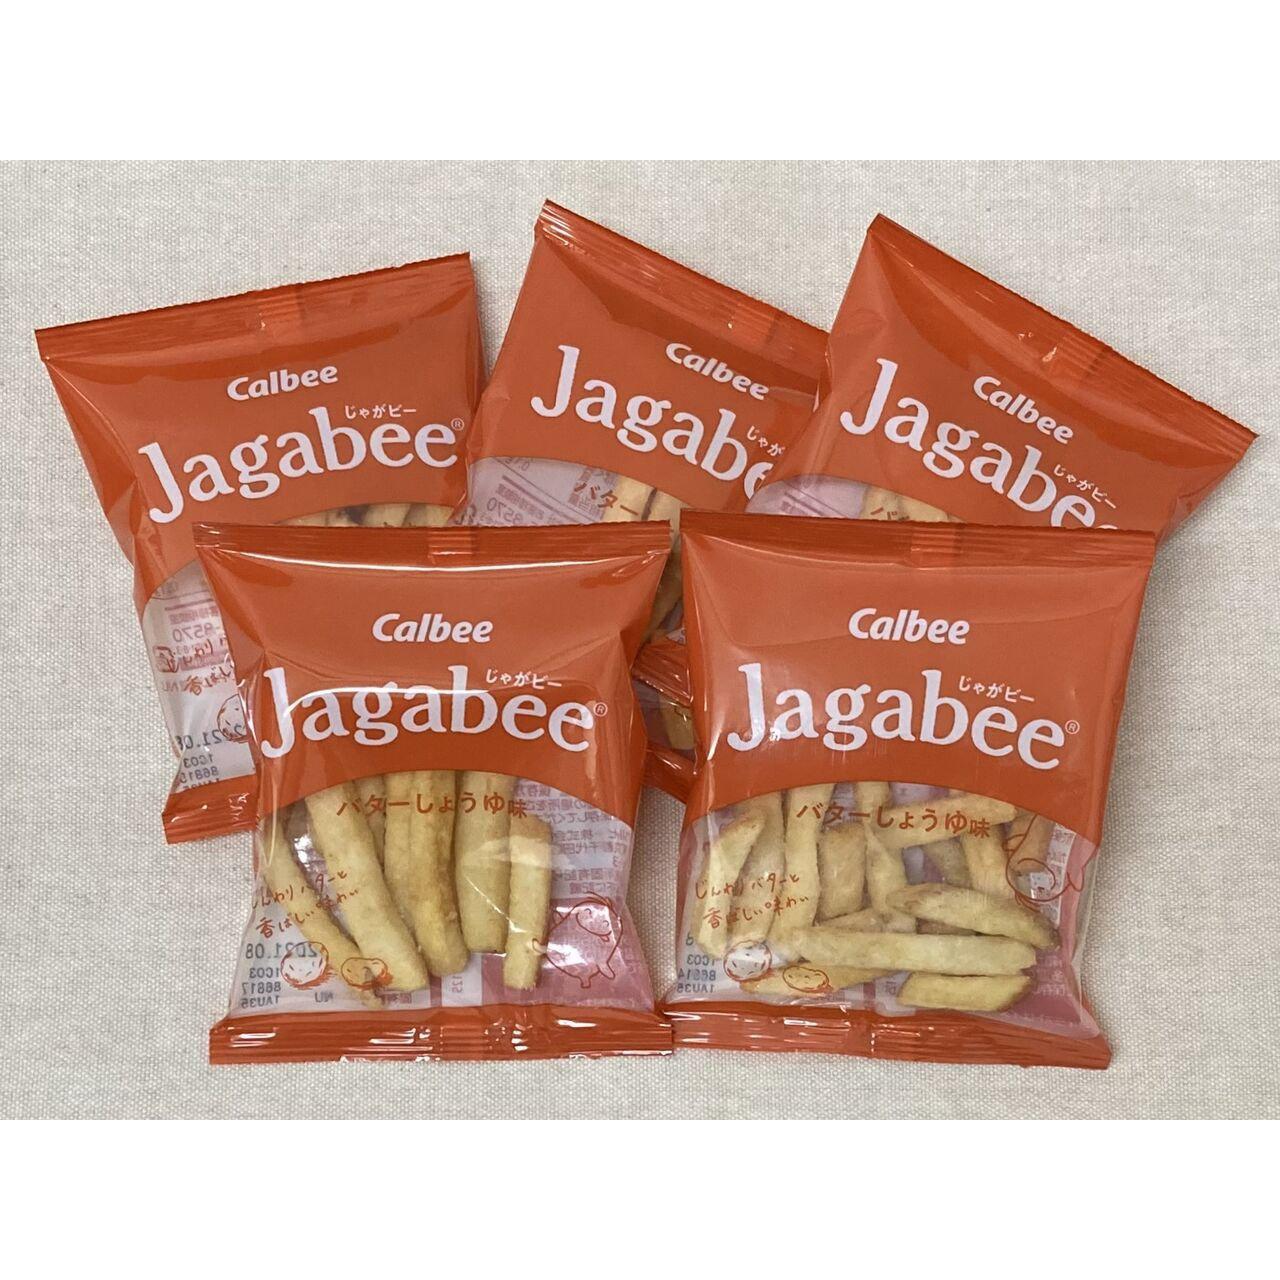 Calbee Jagabee Potato Sticks Snack Butter Soy Sauce (Pack of 3 Boxes) - YOYO JAPAN